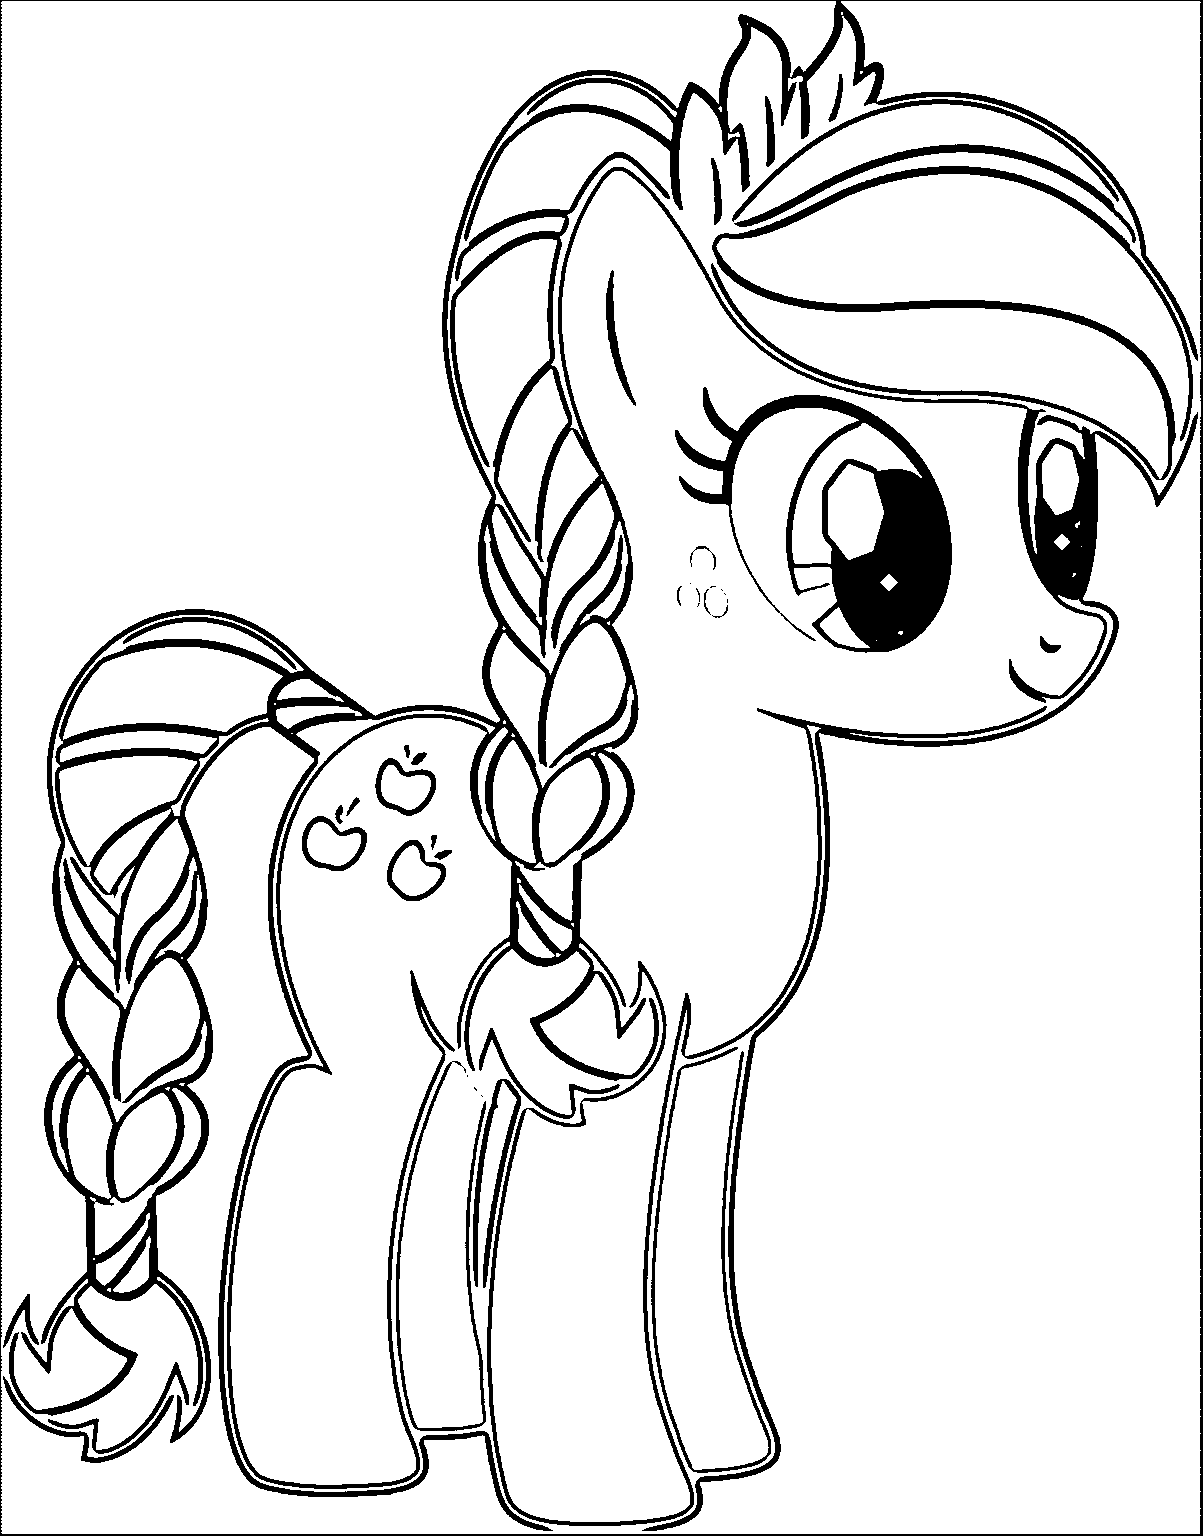 Little Pony - Coloring Pages for Kids and for Adults